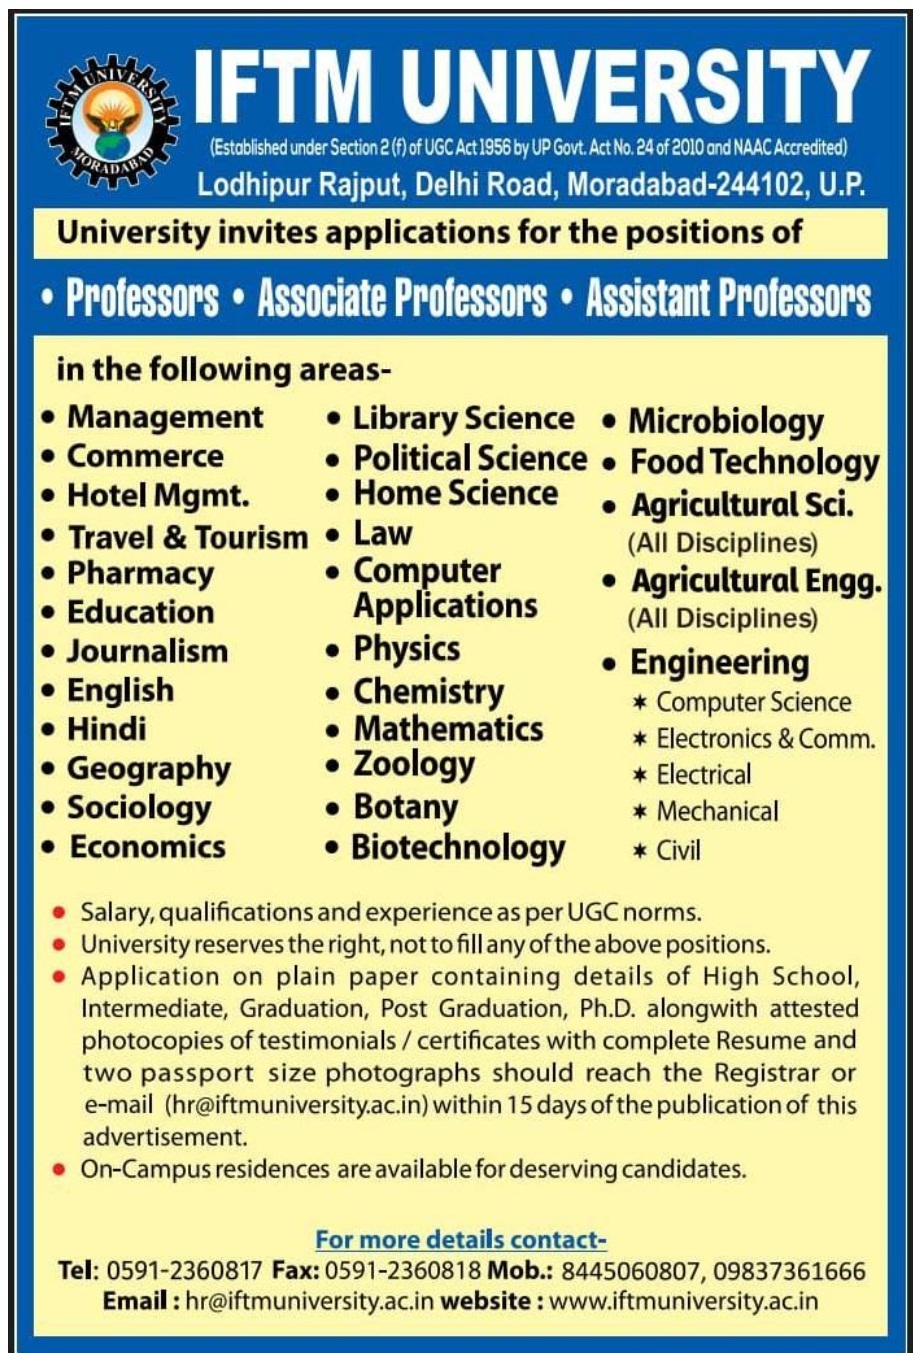 Notification for recruitment of various academic positions.